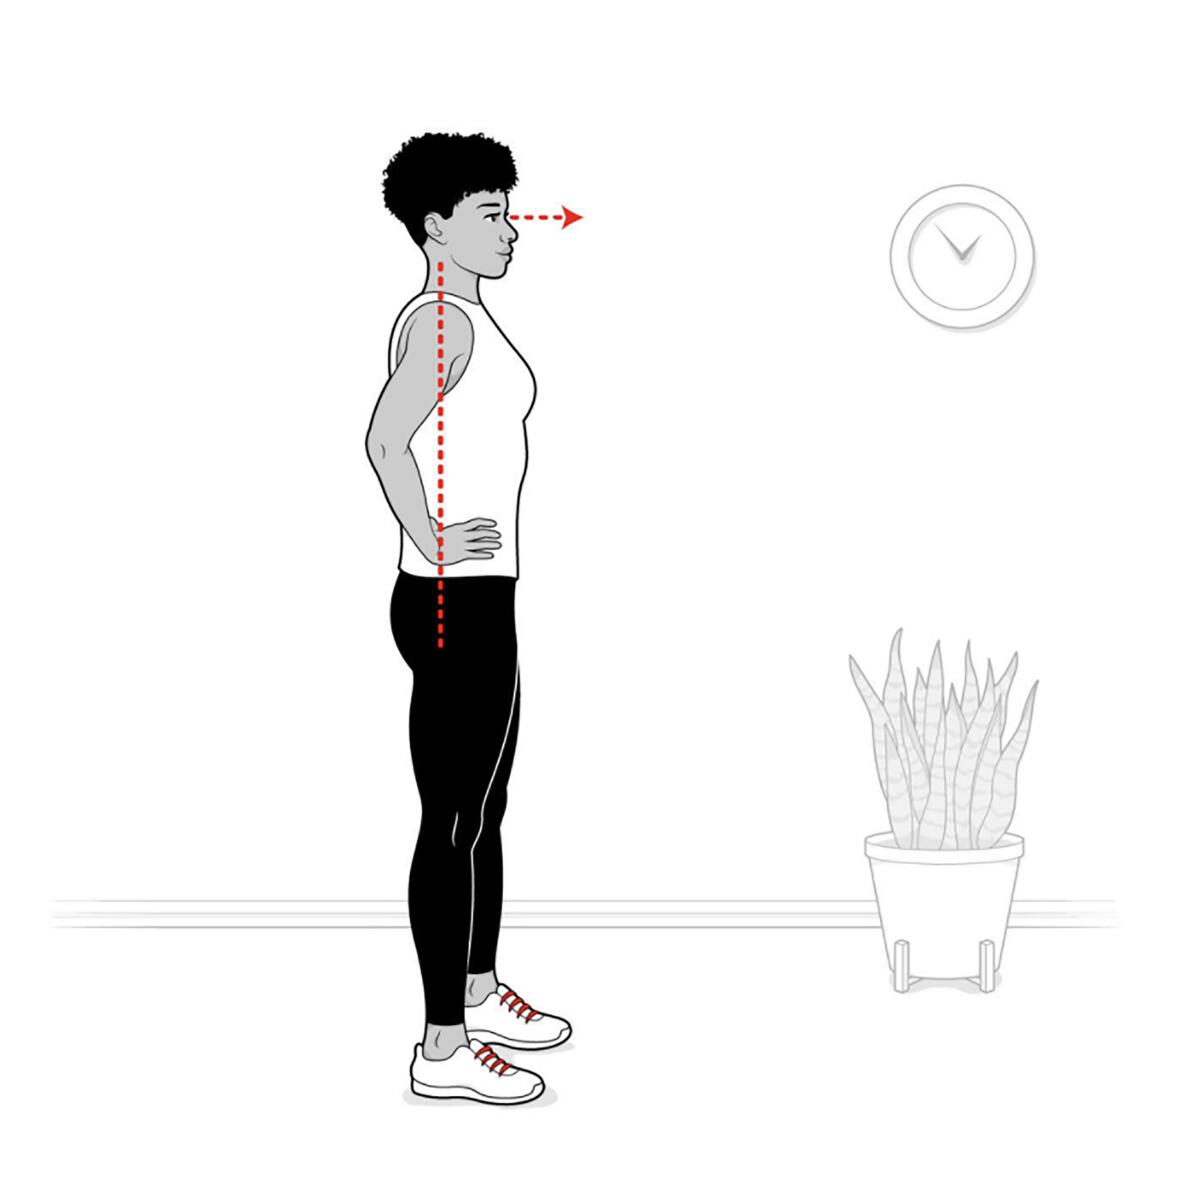 Step 2: Keep your head and spine aligned, chest up, gazing straight ahead. Do not round your back.